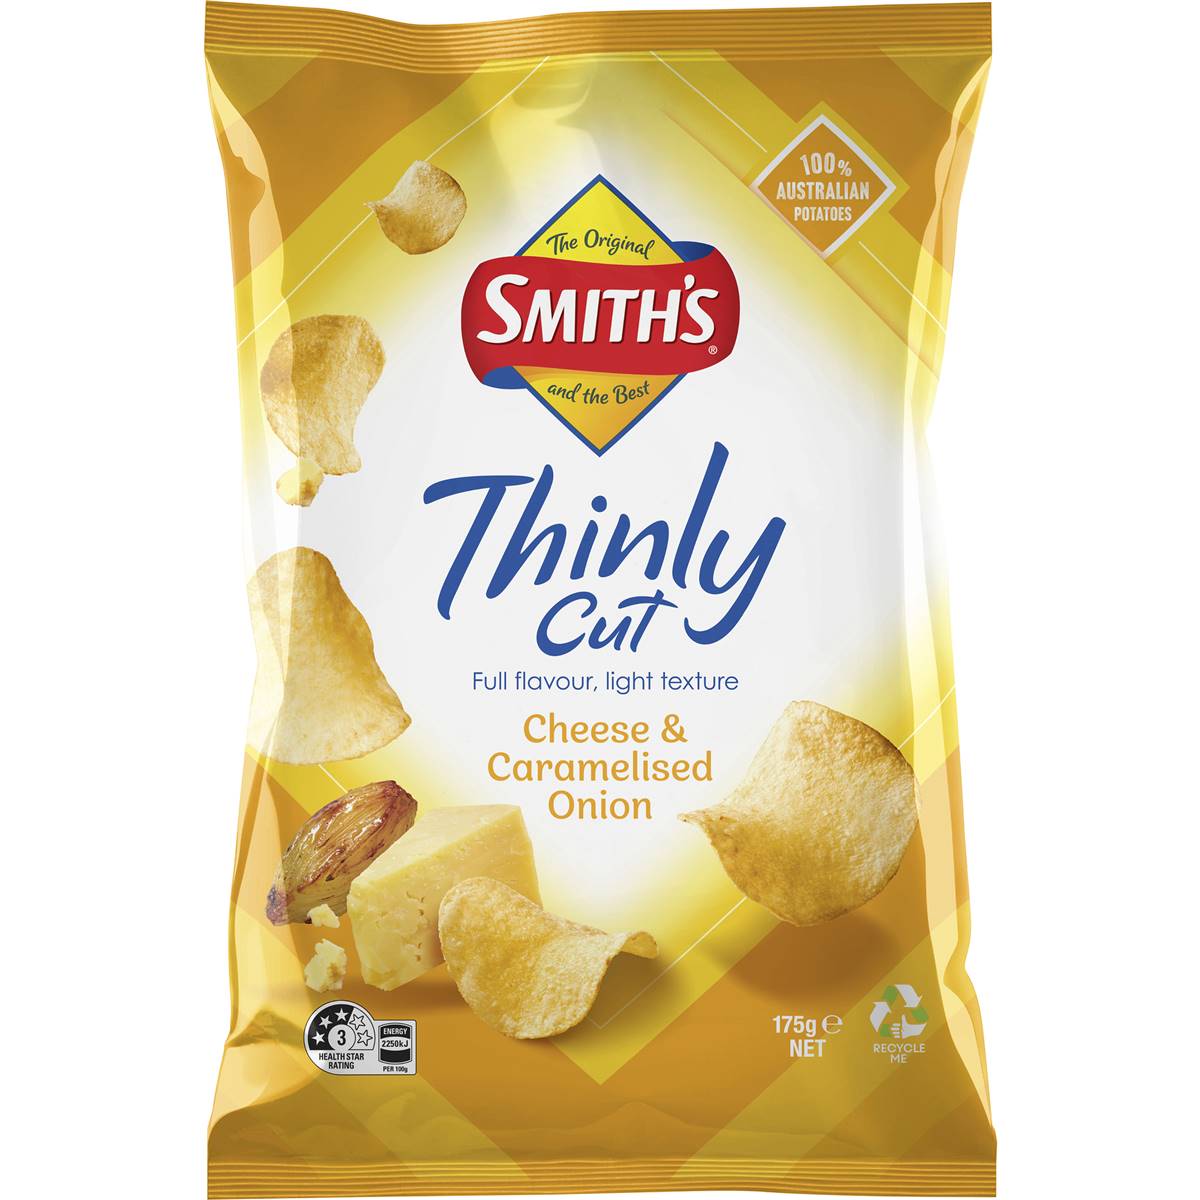 Calories in Smith's Thinly Cut Cheese & Caramelised Onion